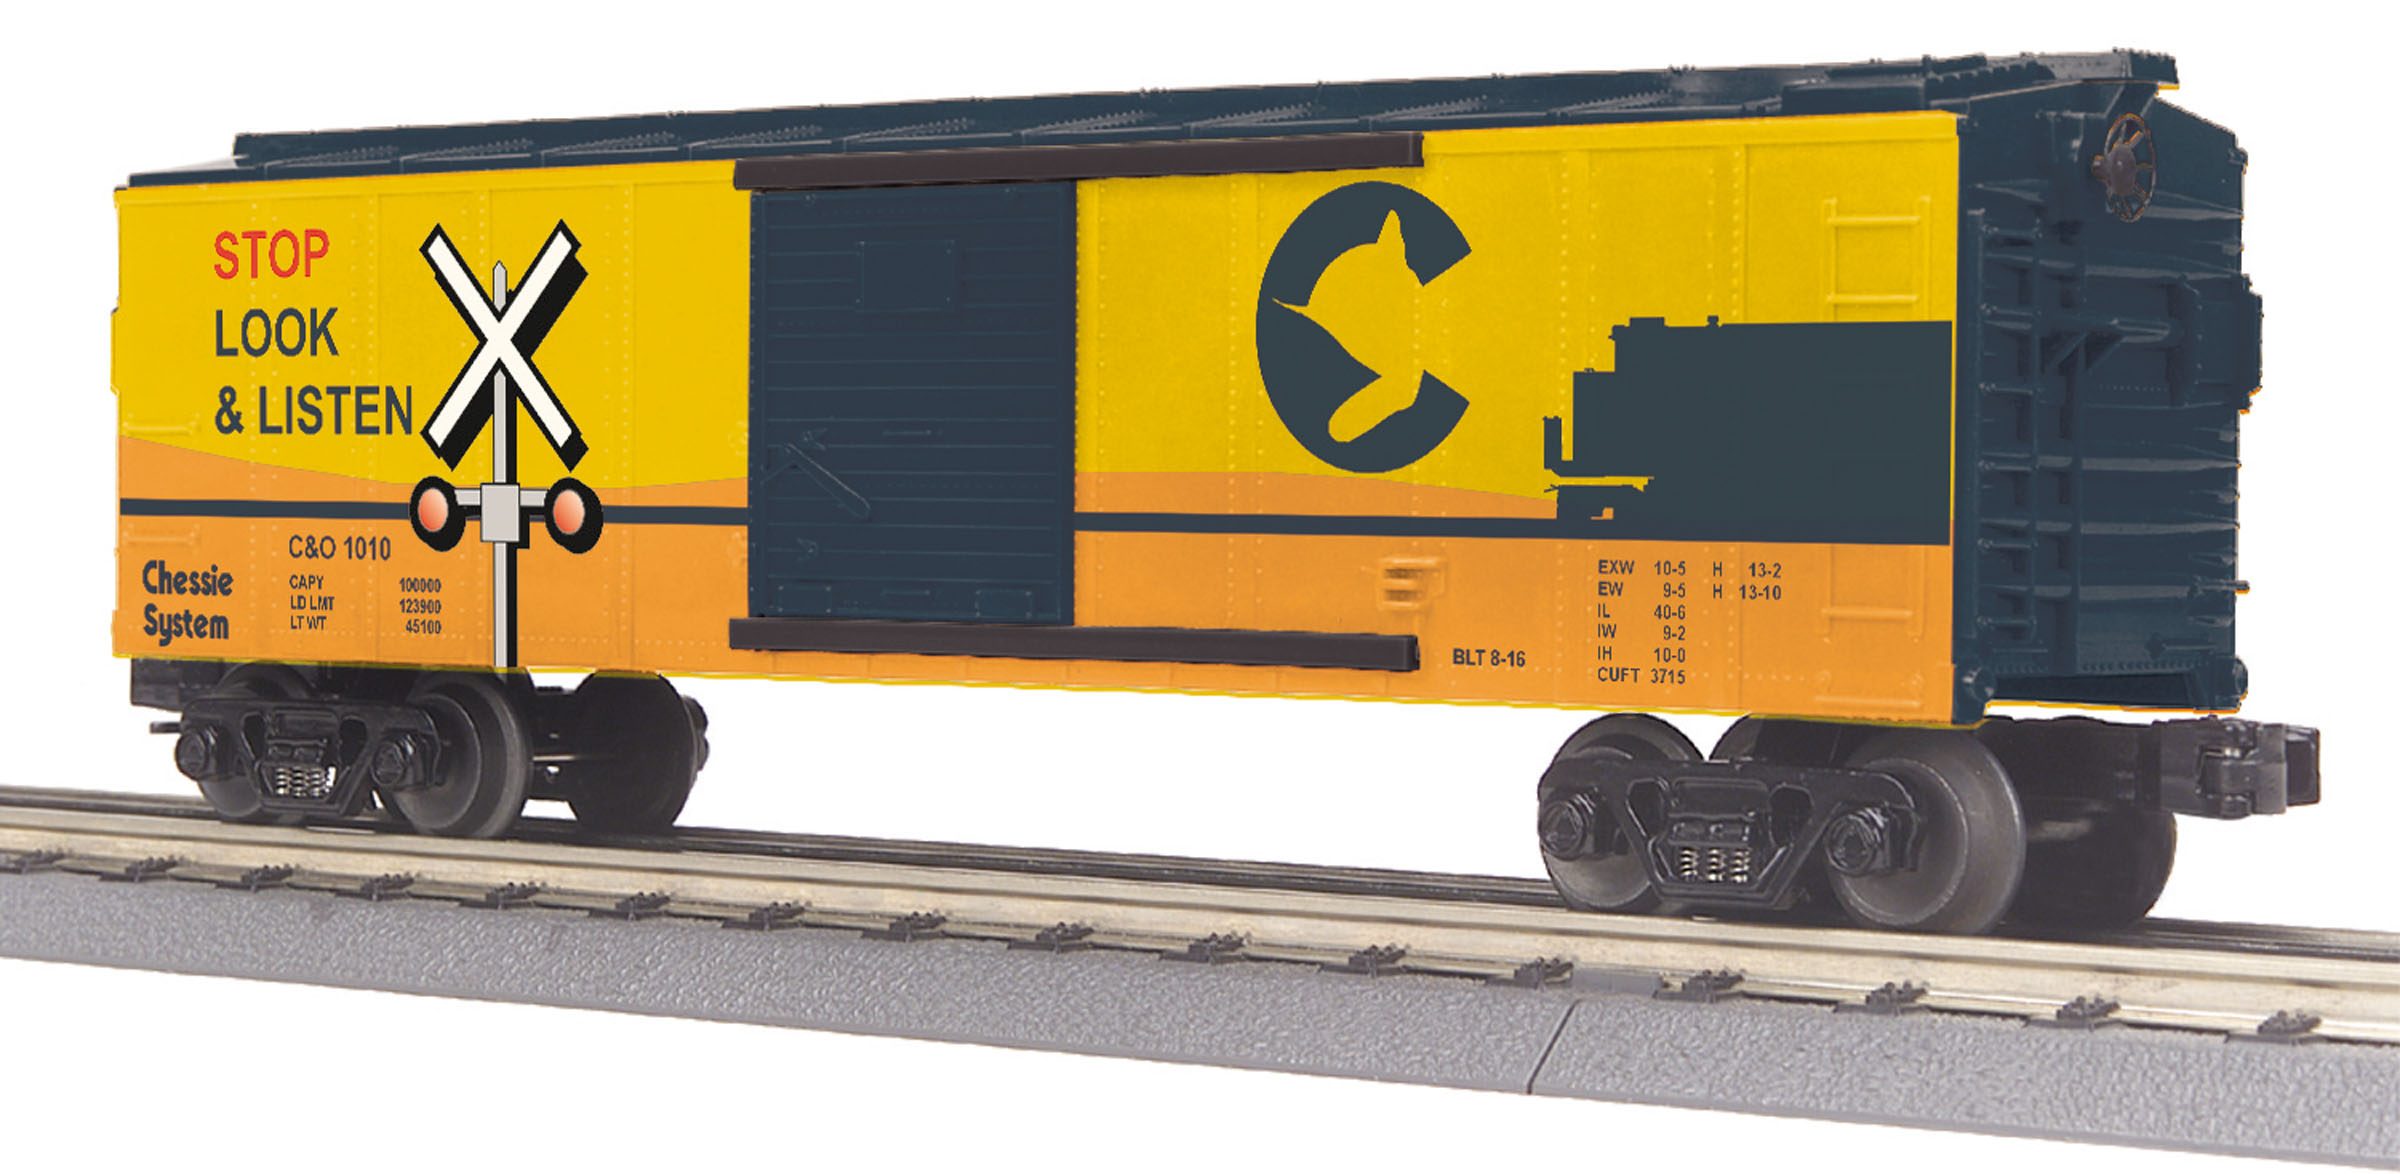 Details about   N scale 40' boxcar C&O Chessie System dark blue Atlas 